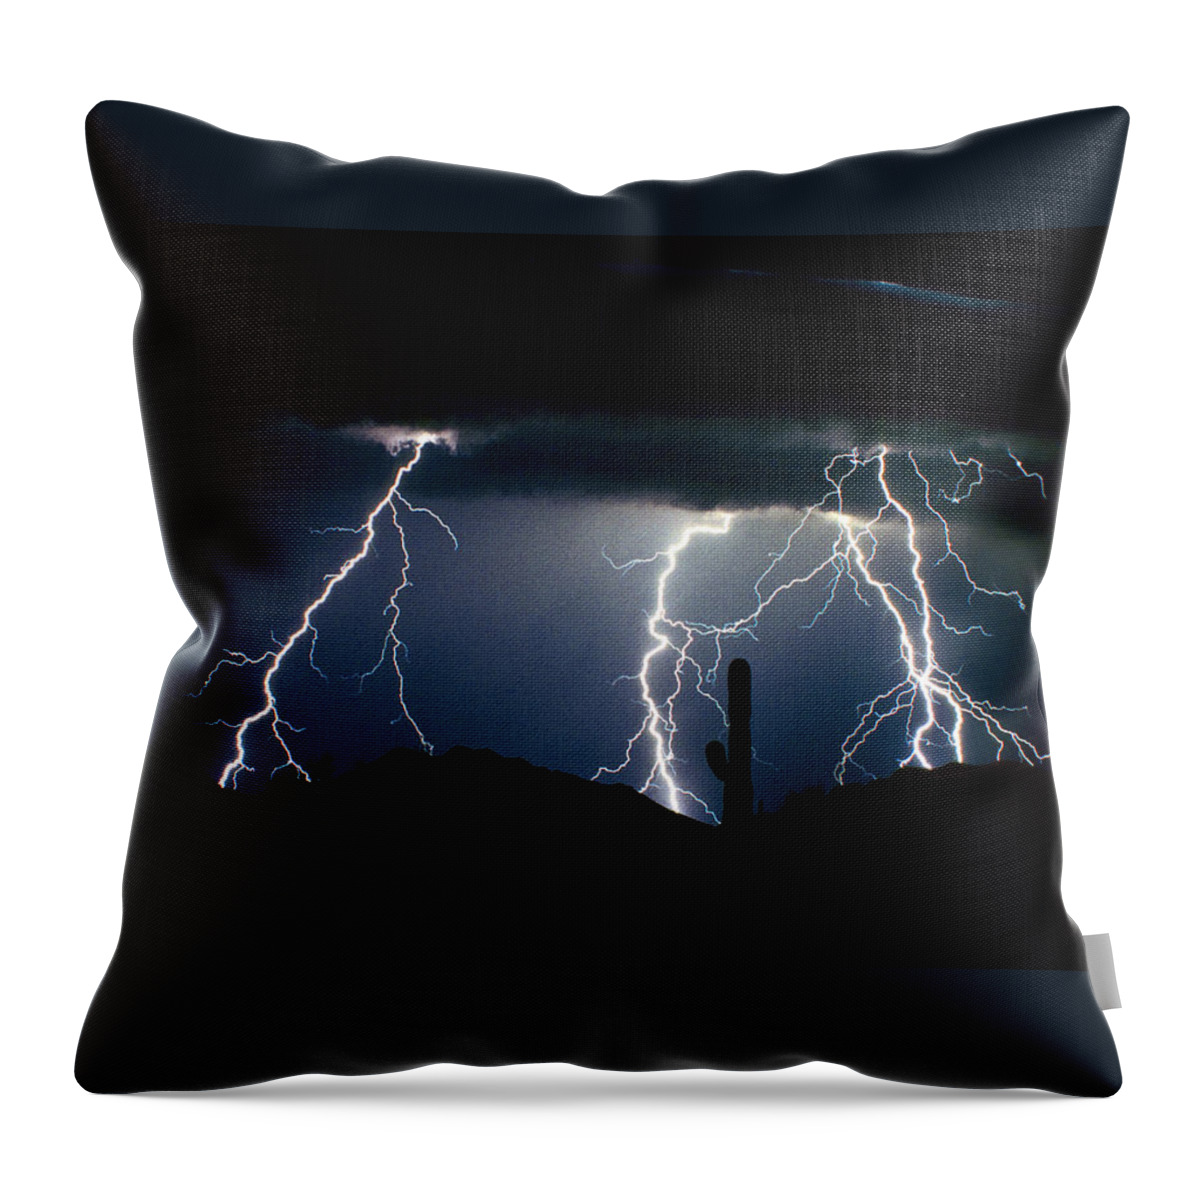 Landscape Throw Pillow featuring the photograph 4 Lightning Bolts Fine Art Photography Print by James BO Insogna